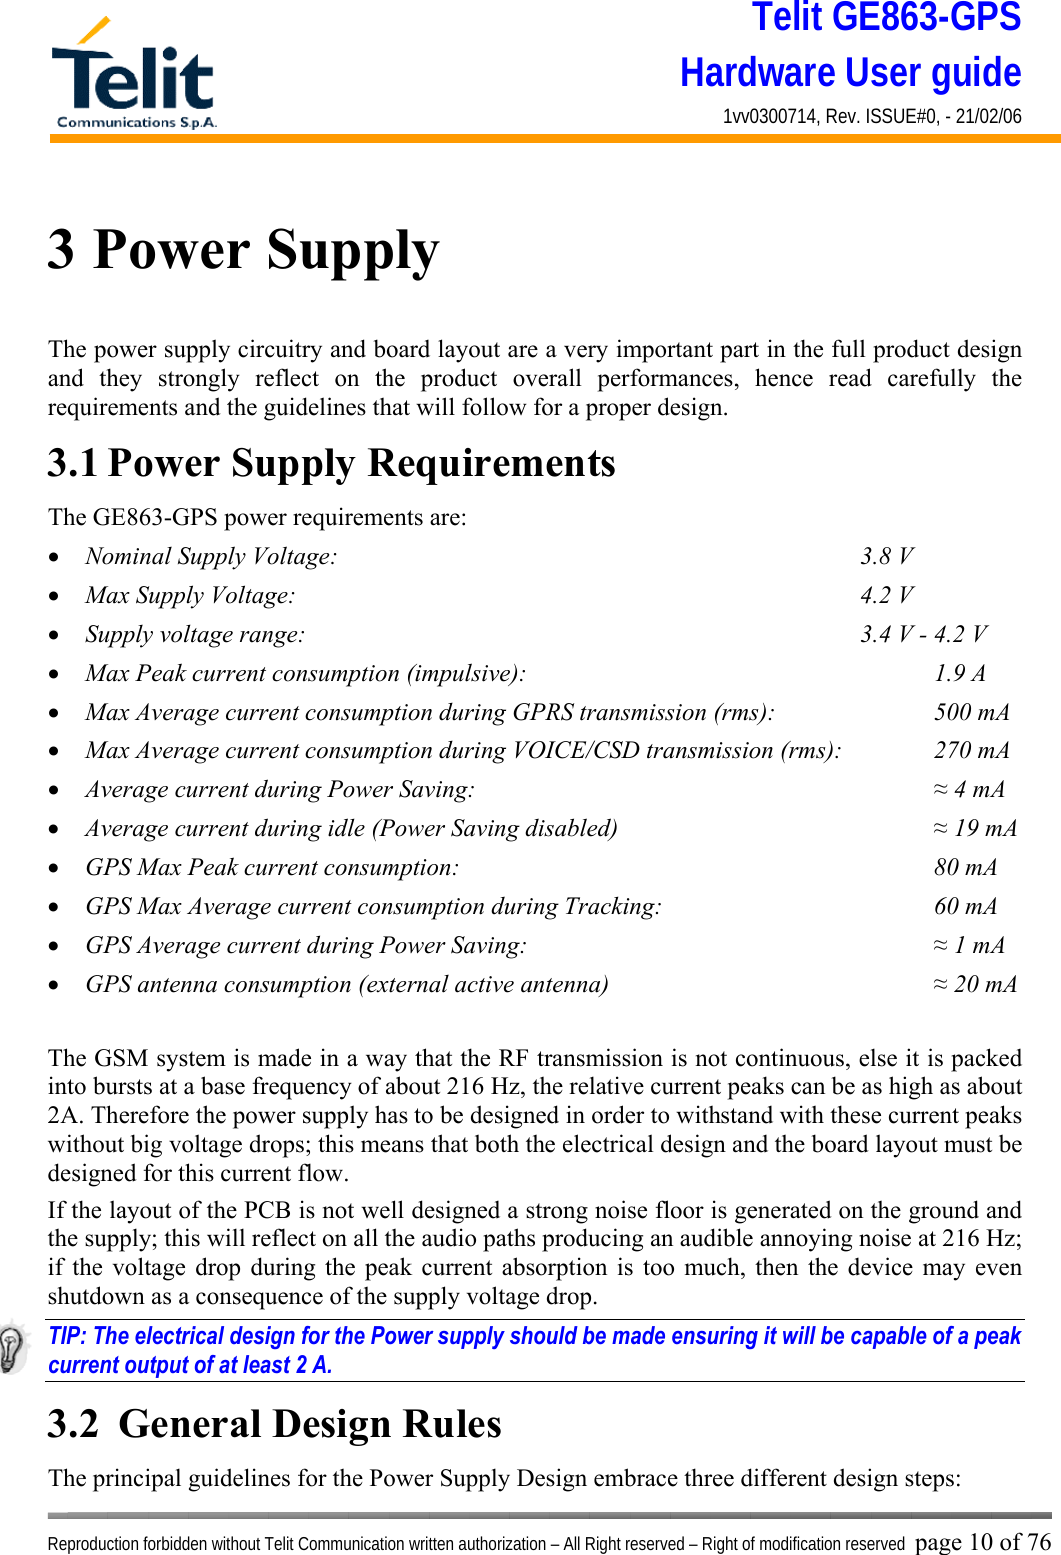 Telit GE863-GPS Hardware User guide 1vv0300714, Rev. ISSUE#0, - 21/02/06    Reproduction forbidden without Telit Communication written authorization – All Right reserved – Right of modification reserved page 10 of 76 3 Power Supply The power supply circuitry and board layout are a very important part in the full product design and they strongly reflect on the product overall performances, hence read carefully the requirements and the guidelines that will follow for a proper design. 3.1 Power Supply Requirements The GE863-GPS power requirements are: •  Nominal Supply Voltage:        3.8 V •  Max Supply Voltage:        4.2 V •  Supply voltage range:                      3.4 V - 4.2 V •  Max Peak current consumption (impulsive):             1.9 A •  Max Average current consumption during GPRS transmission (rms):      500 mA •  Max Average current consumption during VOICE/CSD transmission (rms):    270 mA •  Average current during Power Saving:               ≈ 4 mA •  Average current during idle (Power Saving disabled)          ≈ 19 mA •  GPS Max Peak current consumption:        80 mA •  GPS Max Average current consumption during Tracking:    60 mA •  GPS Average current during Power Saving:             ≈ 1 mA •  GPS antenna consumption (external active antenna)     ≈ 20 mA  The GSM system is made in a way that the RF transmission is not continuous, else it is packed into bursts at a base frequency of about 216 Hz, the relative current peaks can be as high as about 2A. Therefore the power supply has to be designed in order to withstand with these current peaks without big voltage drops; this means that both the electrical design and the board layout must be designed for this current flow. If the layout of the PCB is not well designed a strong noise floor is generated on the ground and the supply; this will reflect on all the audio paths producing an audible annoying noise at 216 Hz; if the voltage drop during the peak current absorption is too much, then the device may even shutdown as a consequence of the supply voltage drop. TIP: The electrical design for the Power supply should be made ensuring it will be capable of a peak current output of at least 2 A. 3.2  General Design Rules The principal guidelines for the Power Supply Design embrace three different design steps: 